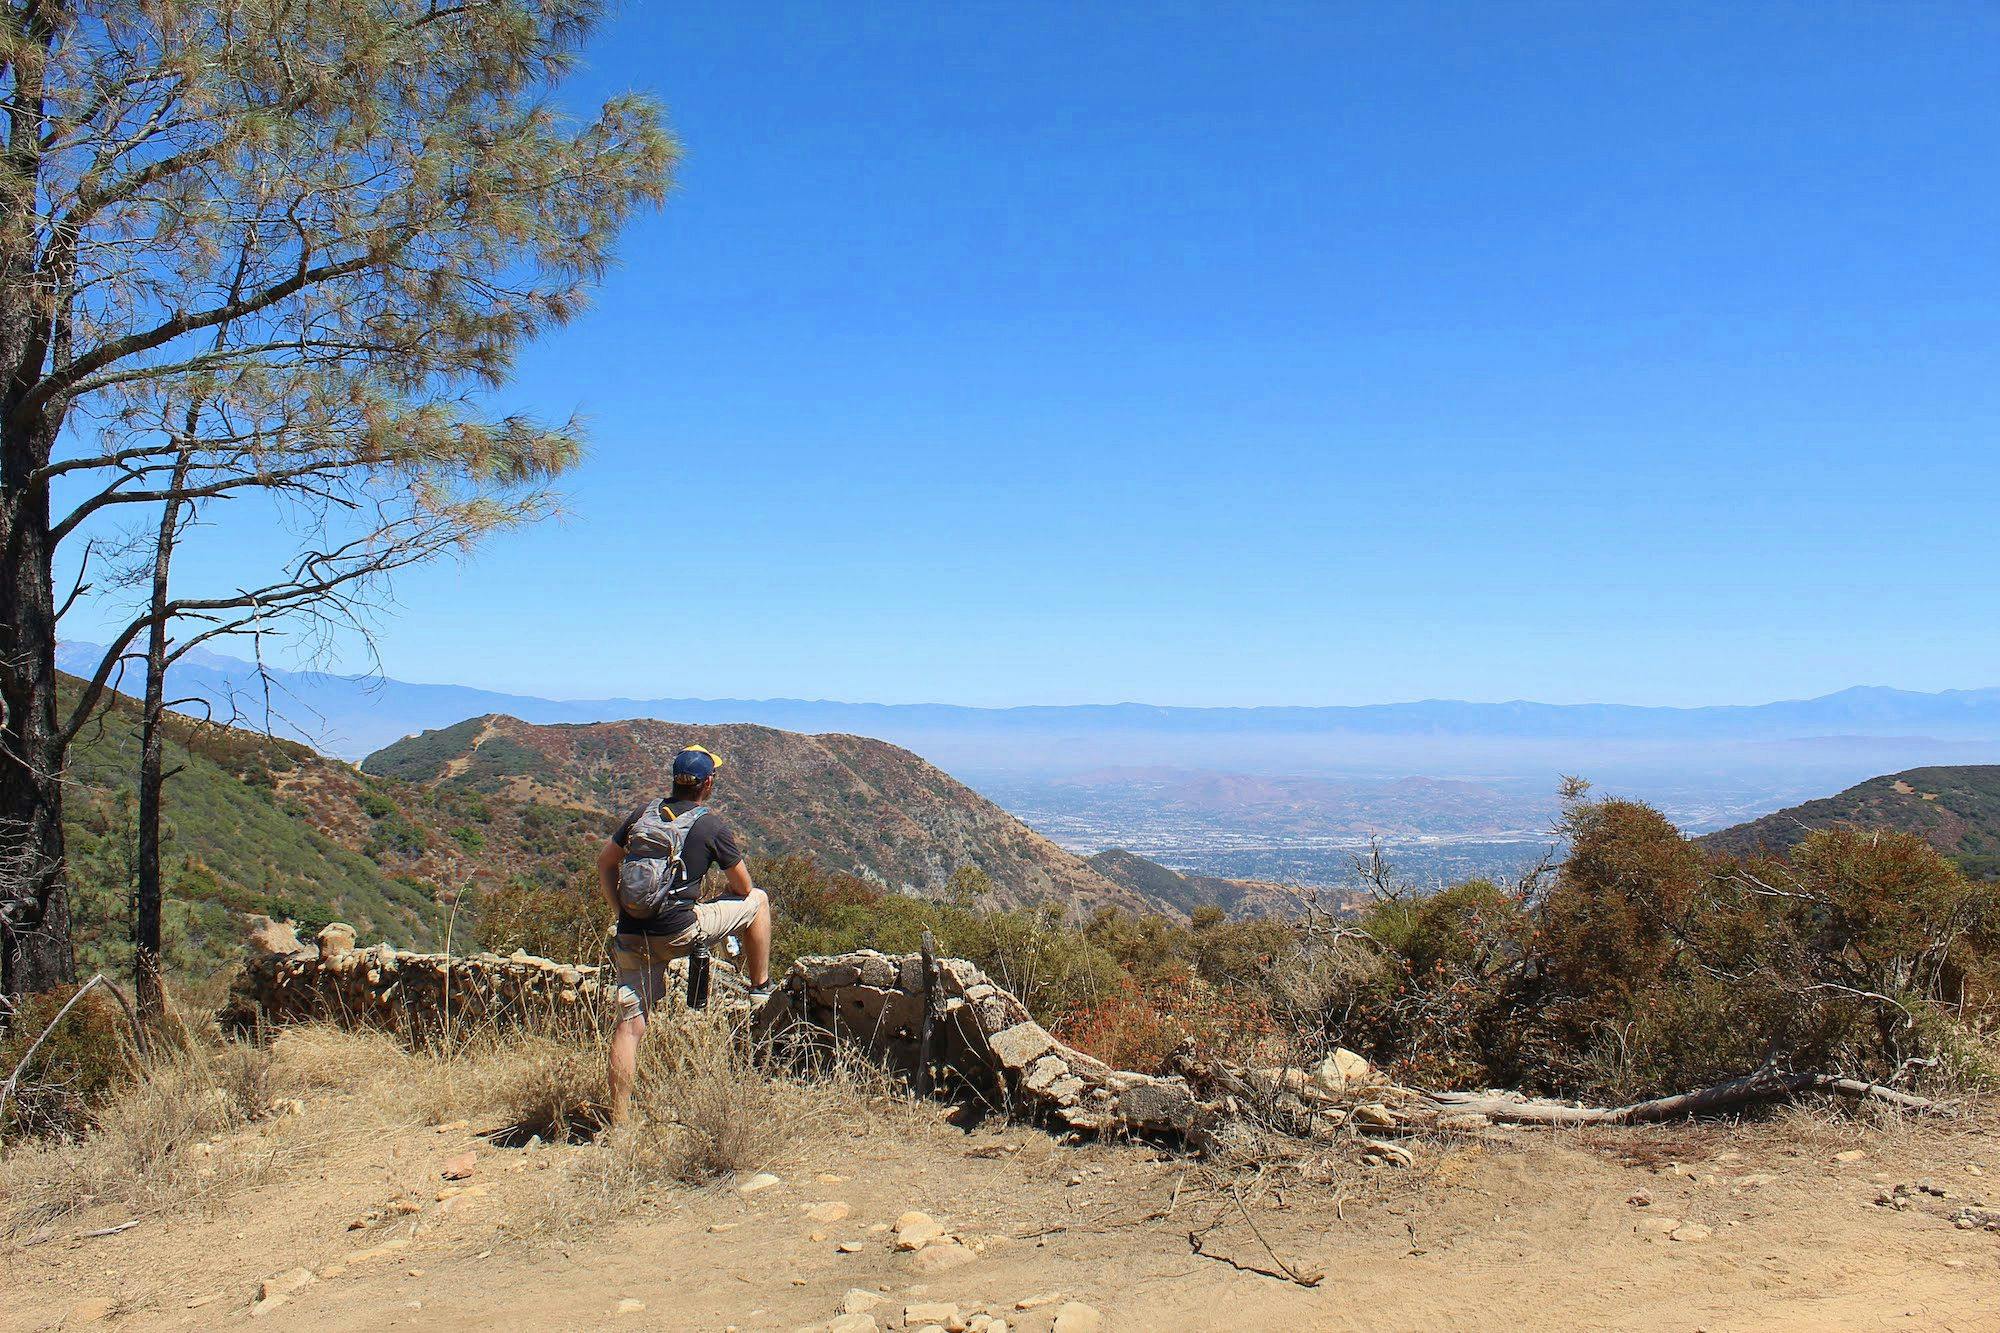 Hiking to Ruins in Southern California Mountains